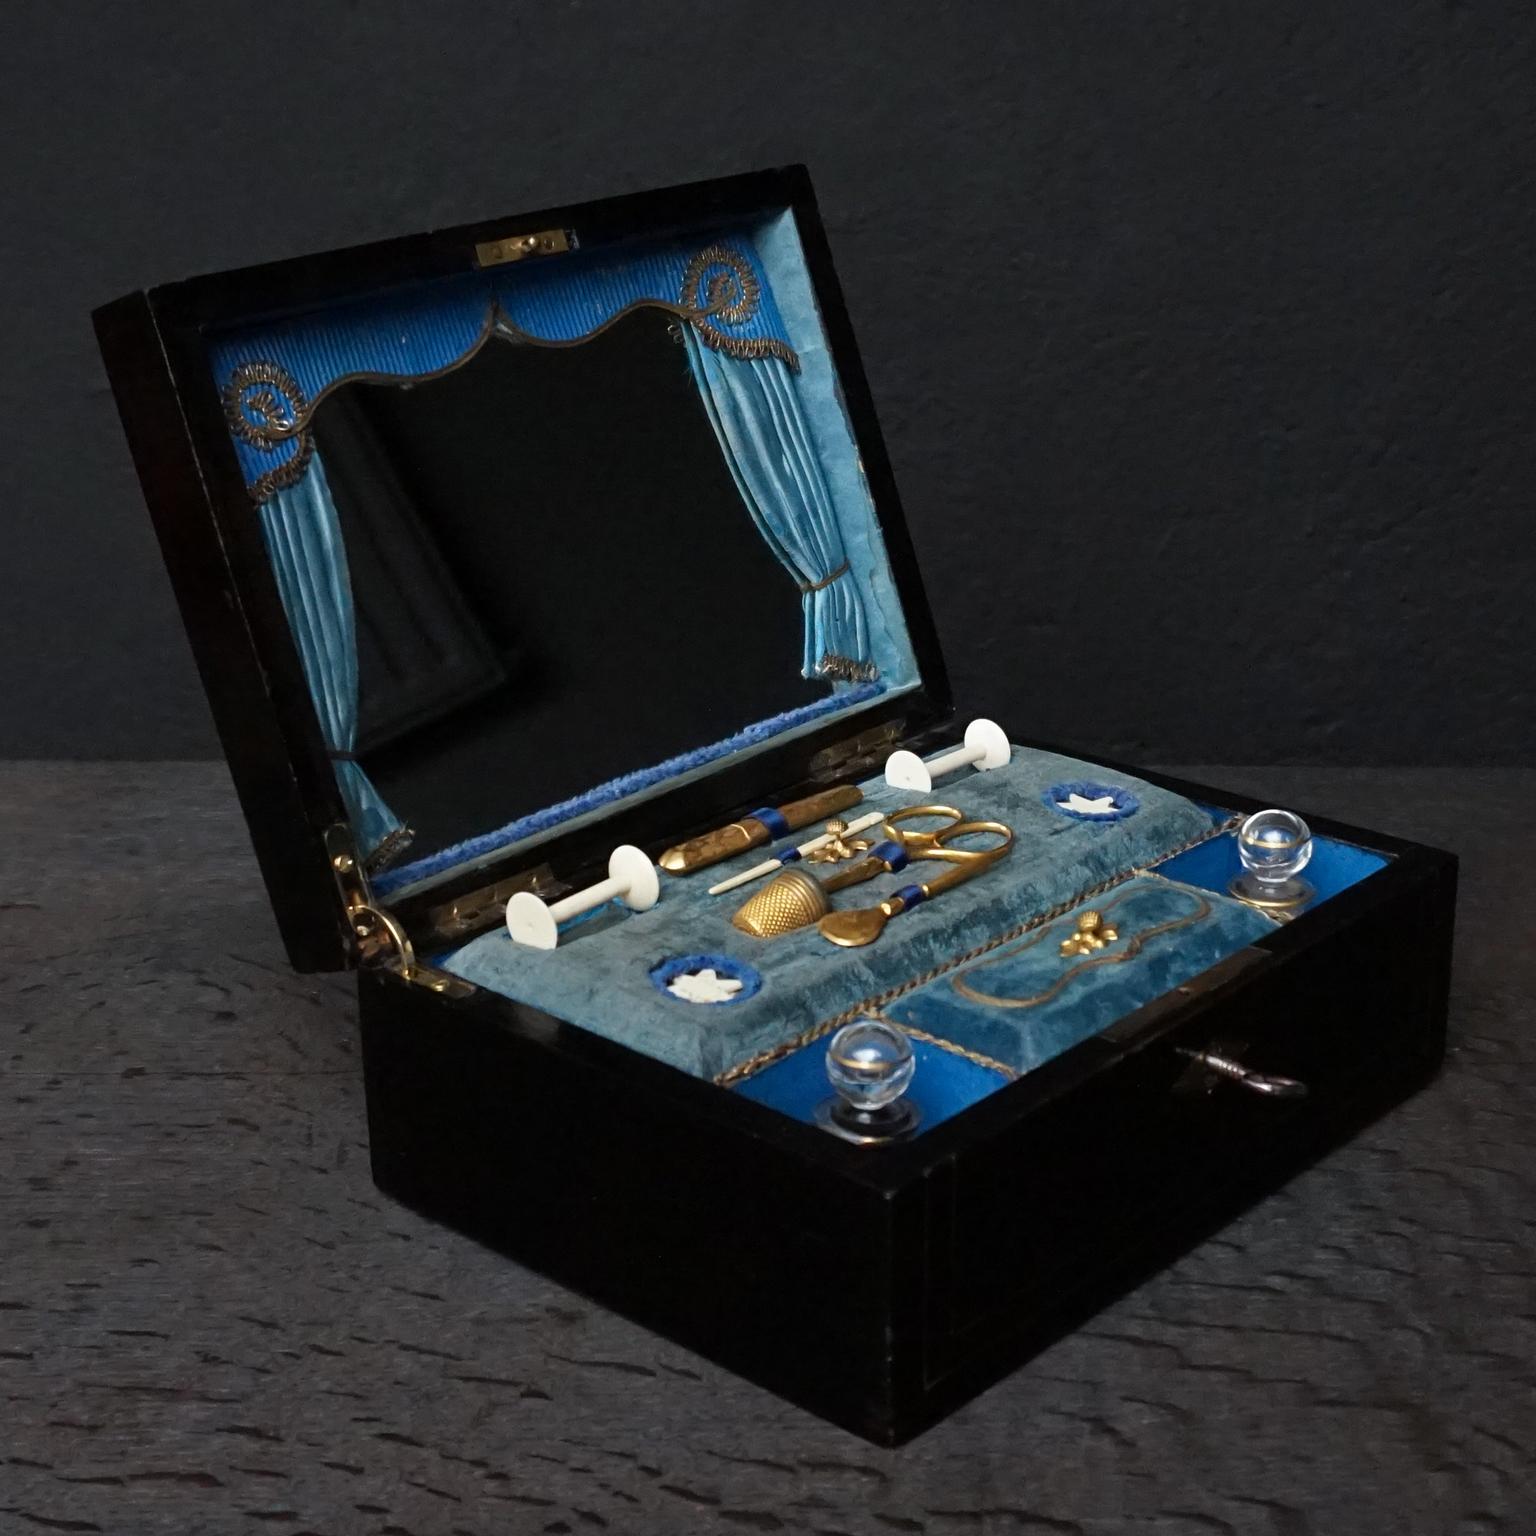 Victorian blackened wood and brass initialed vanity, sewing or writing box, the lid interior mounted with a mirror and blue silk 'curtains' like a theatre, a painted blue and blue velvet-clad tray with bone and gilt implements like bone bobbins and